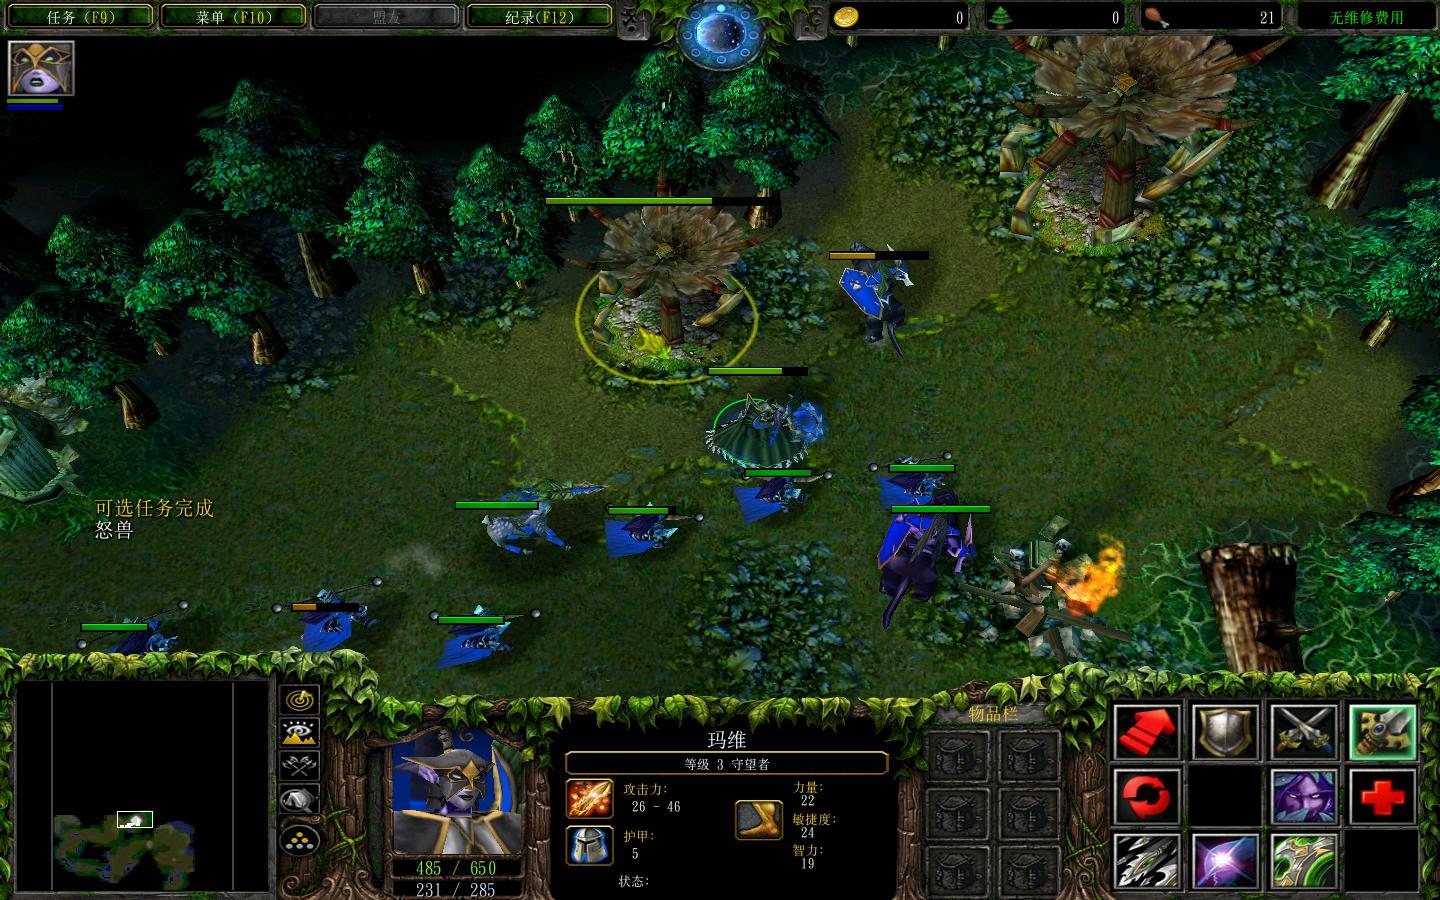 ħ3Warcraft III The Frozen Throne1.24 v1.85A